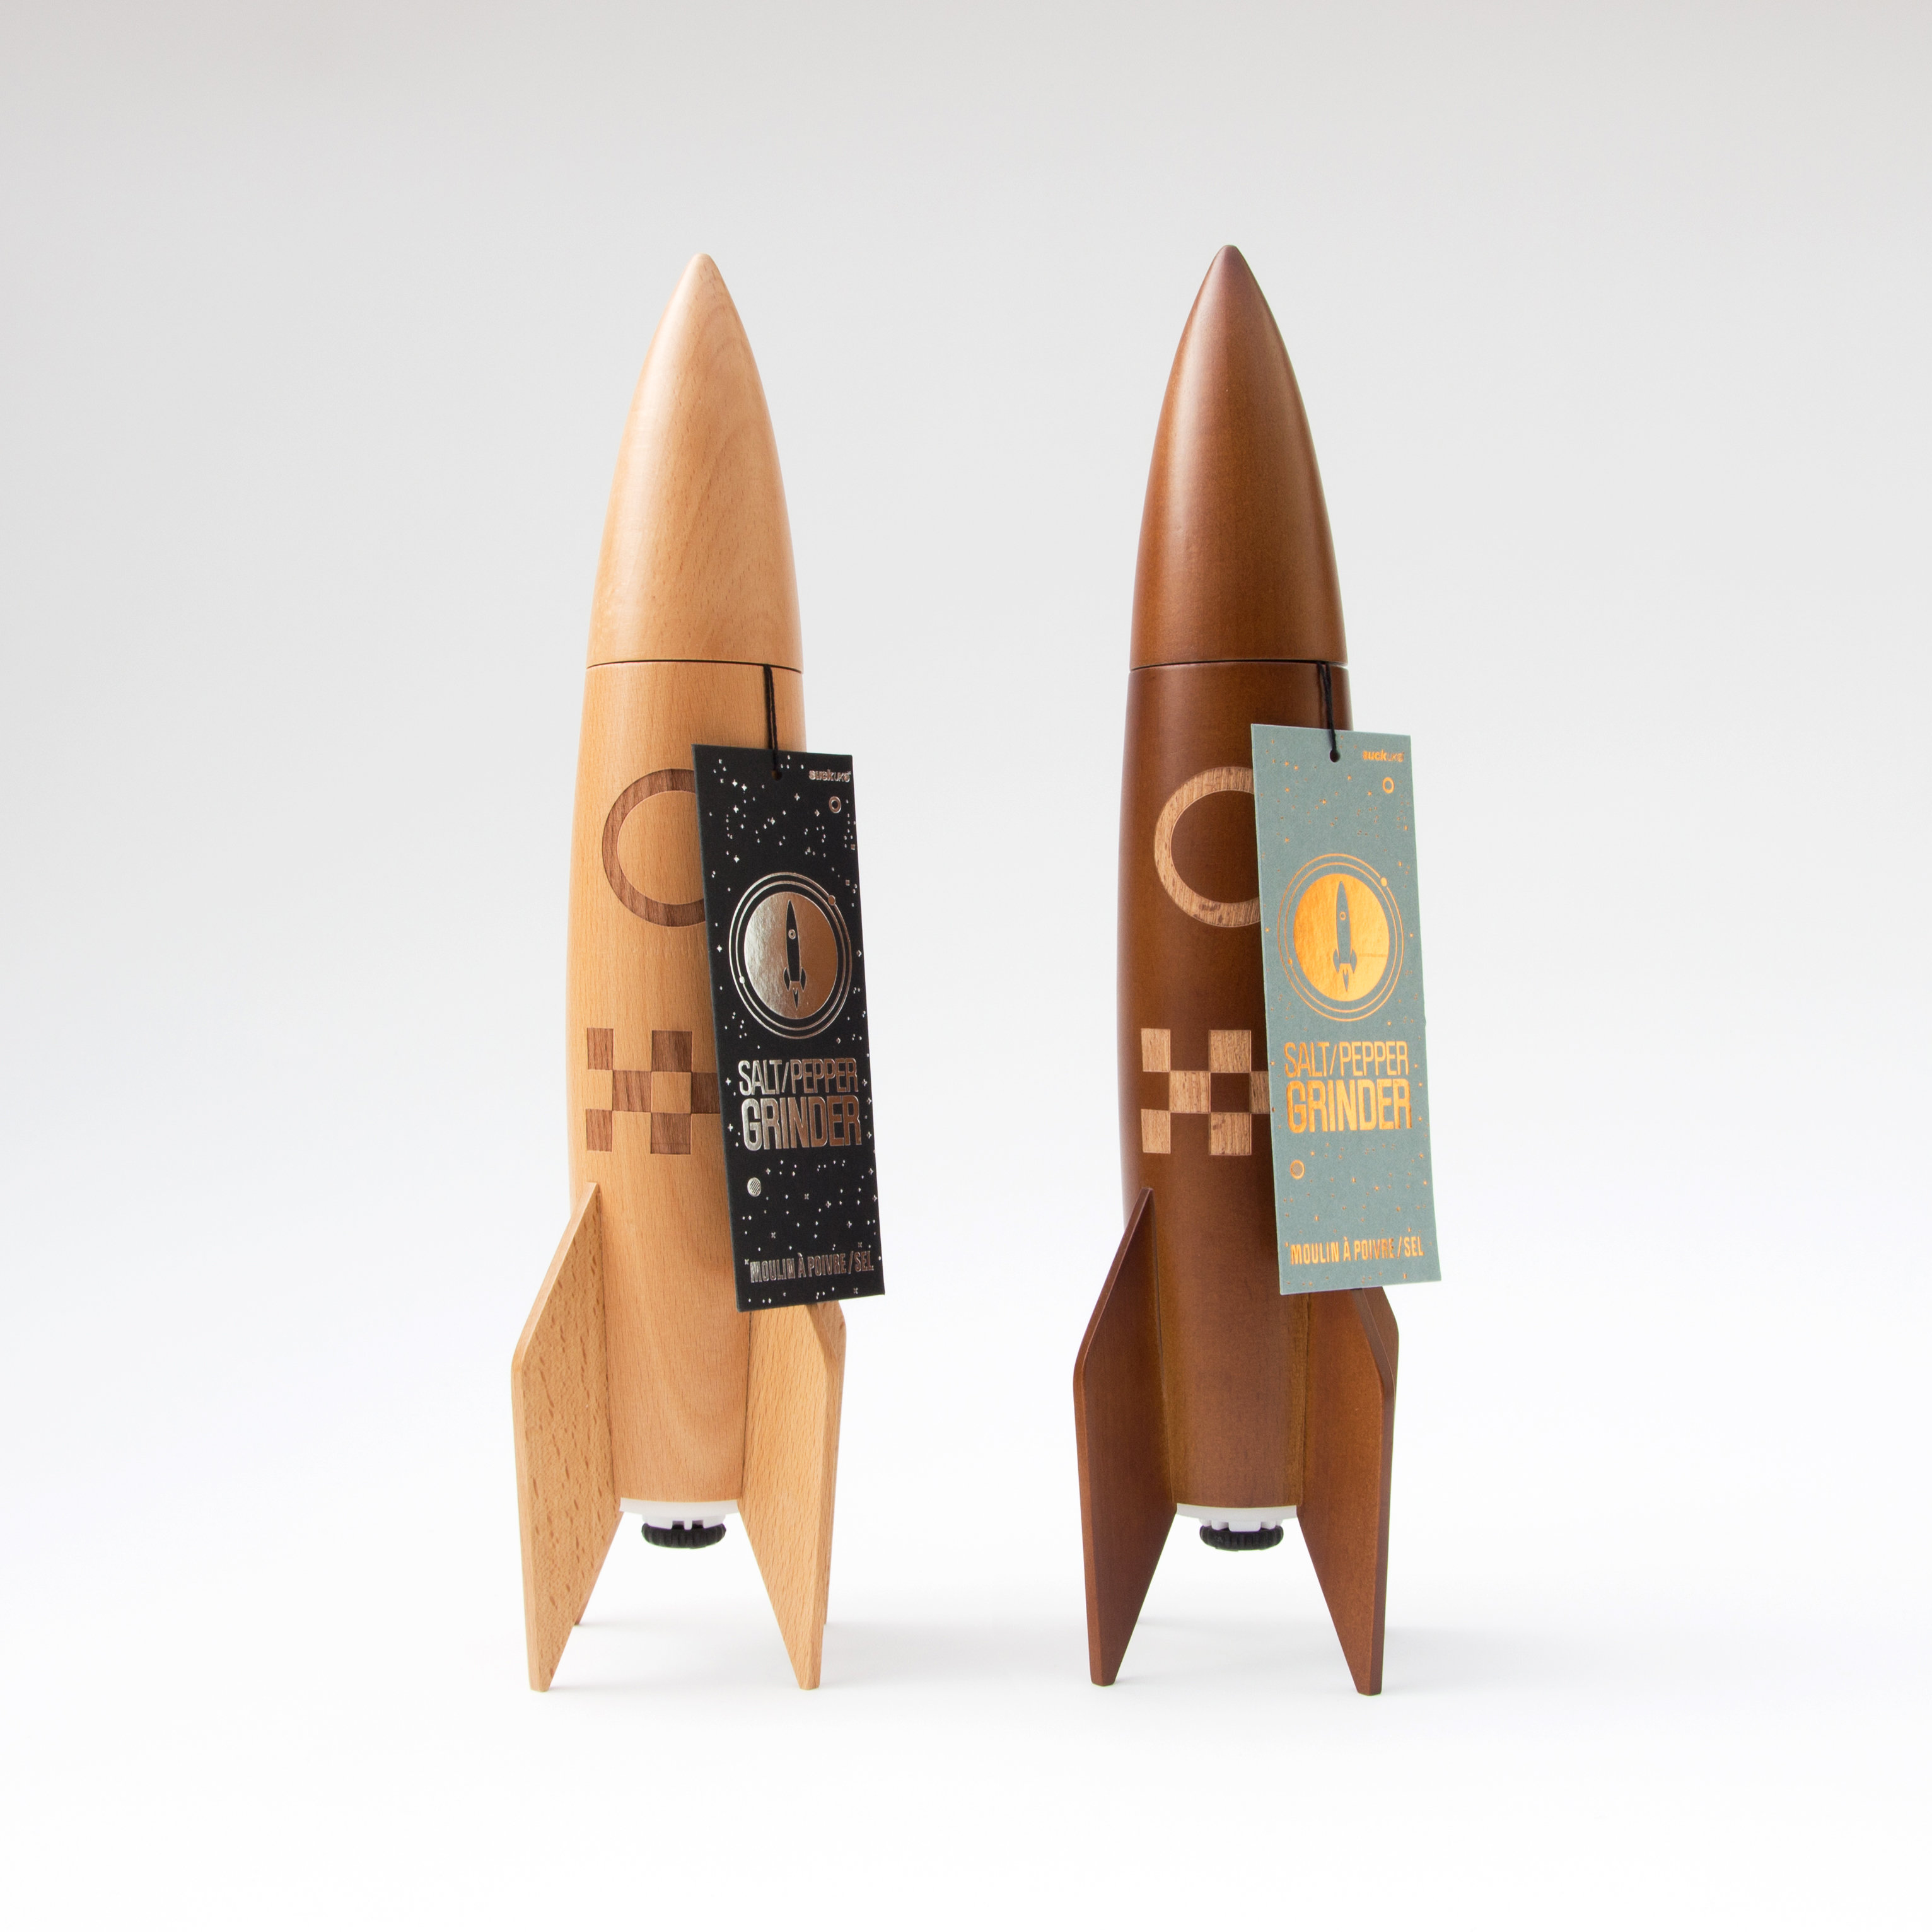 Rocket salt and pepper grinders with tags